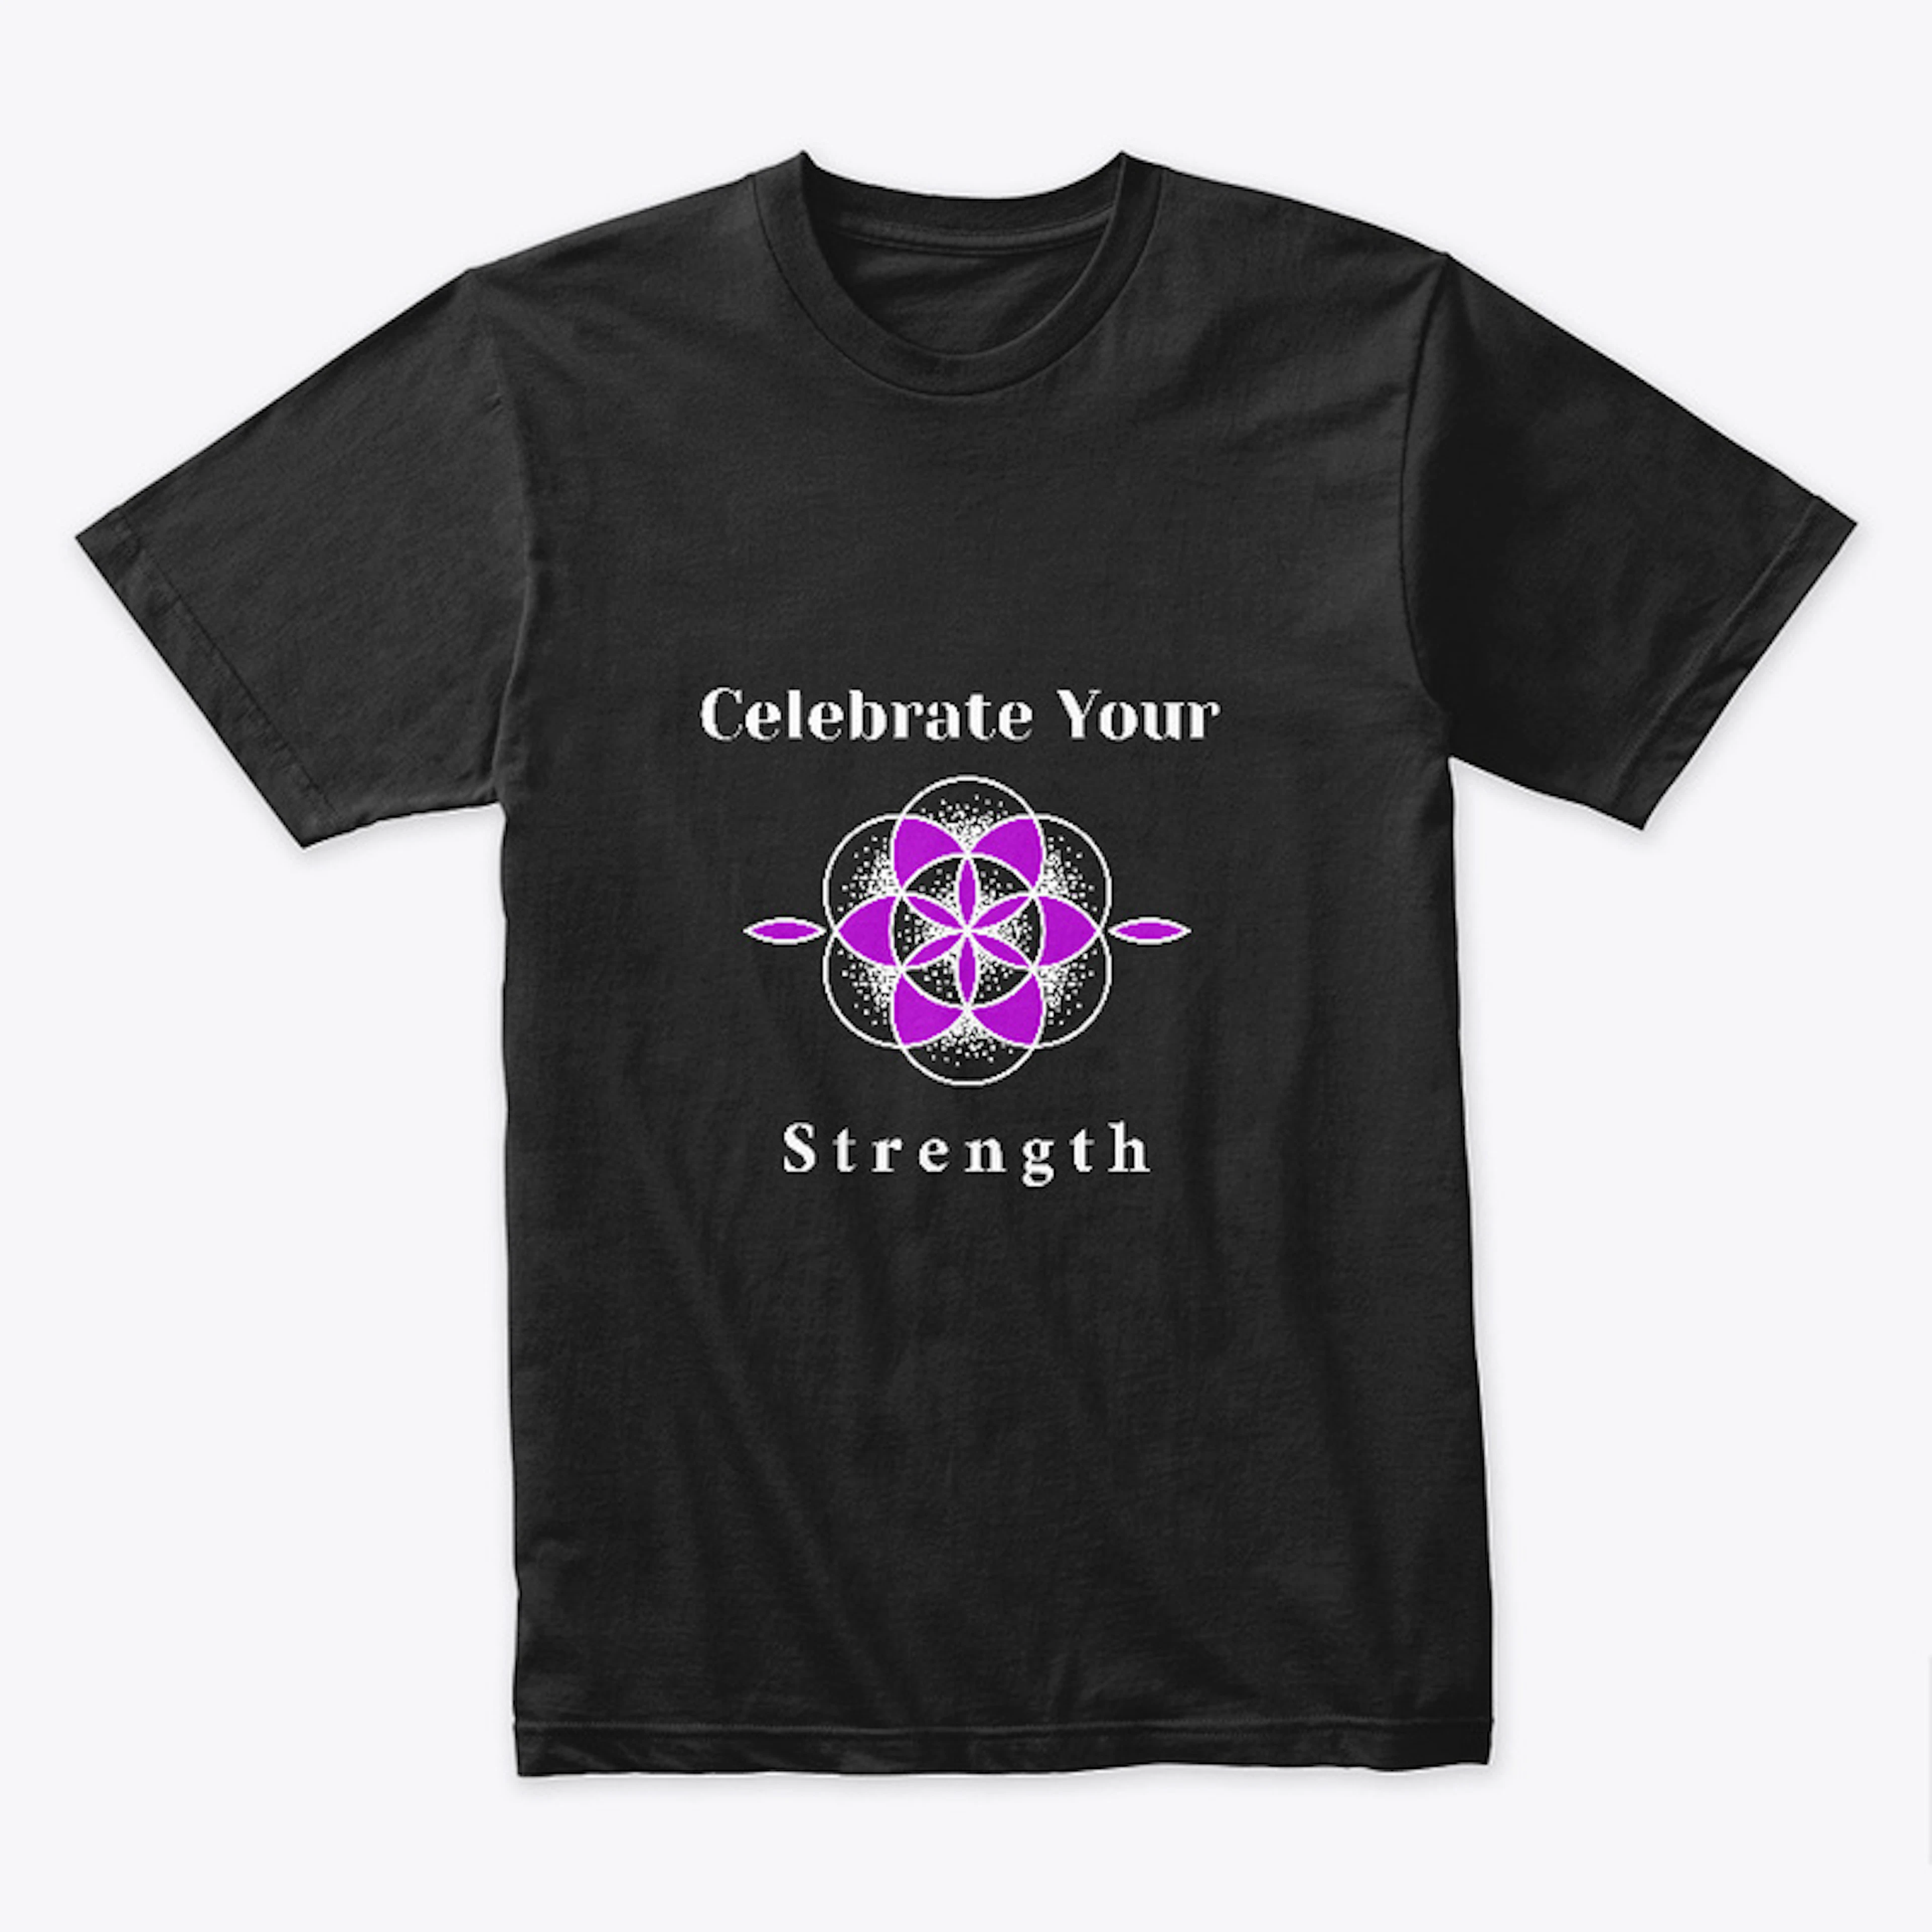 Celebrate Your Strength T-Shirt and Gear